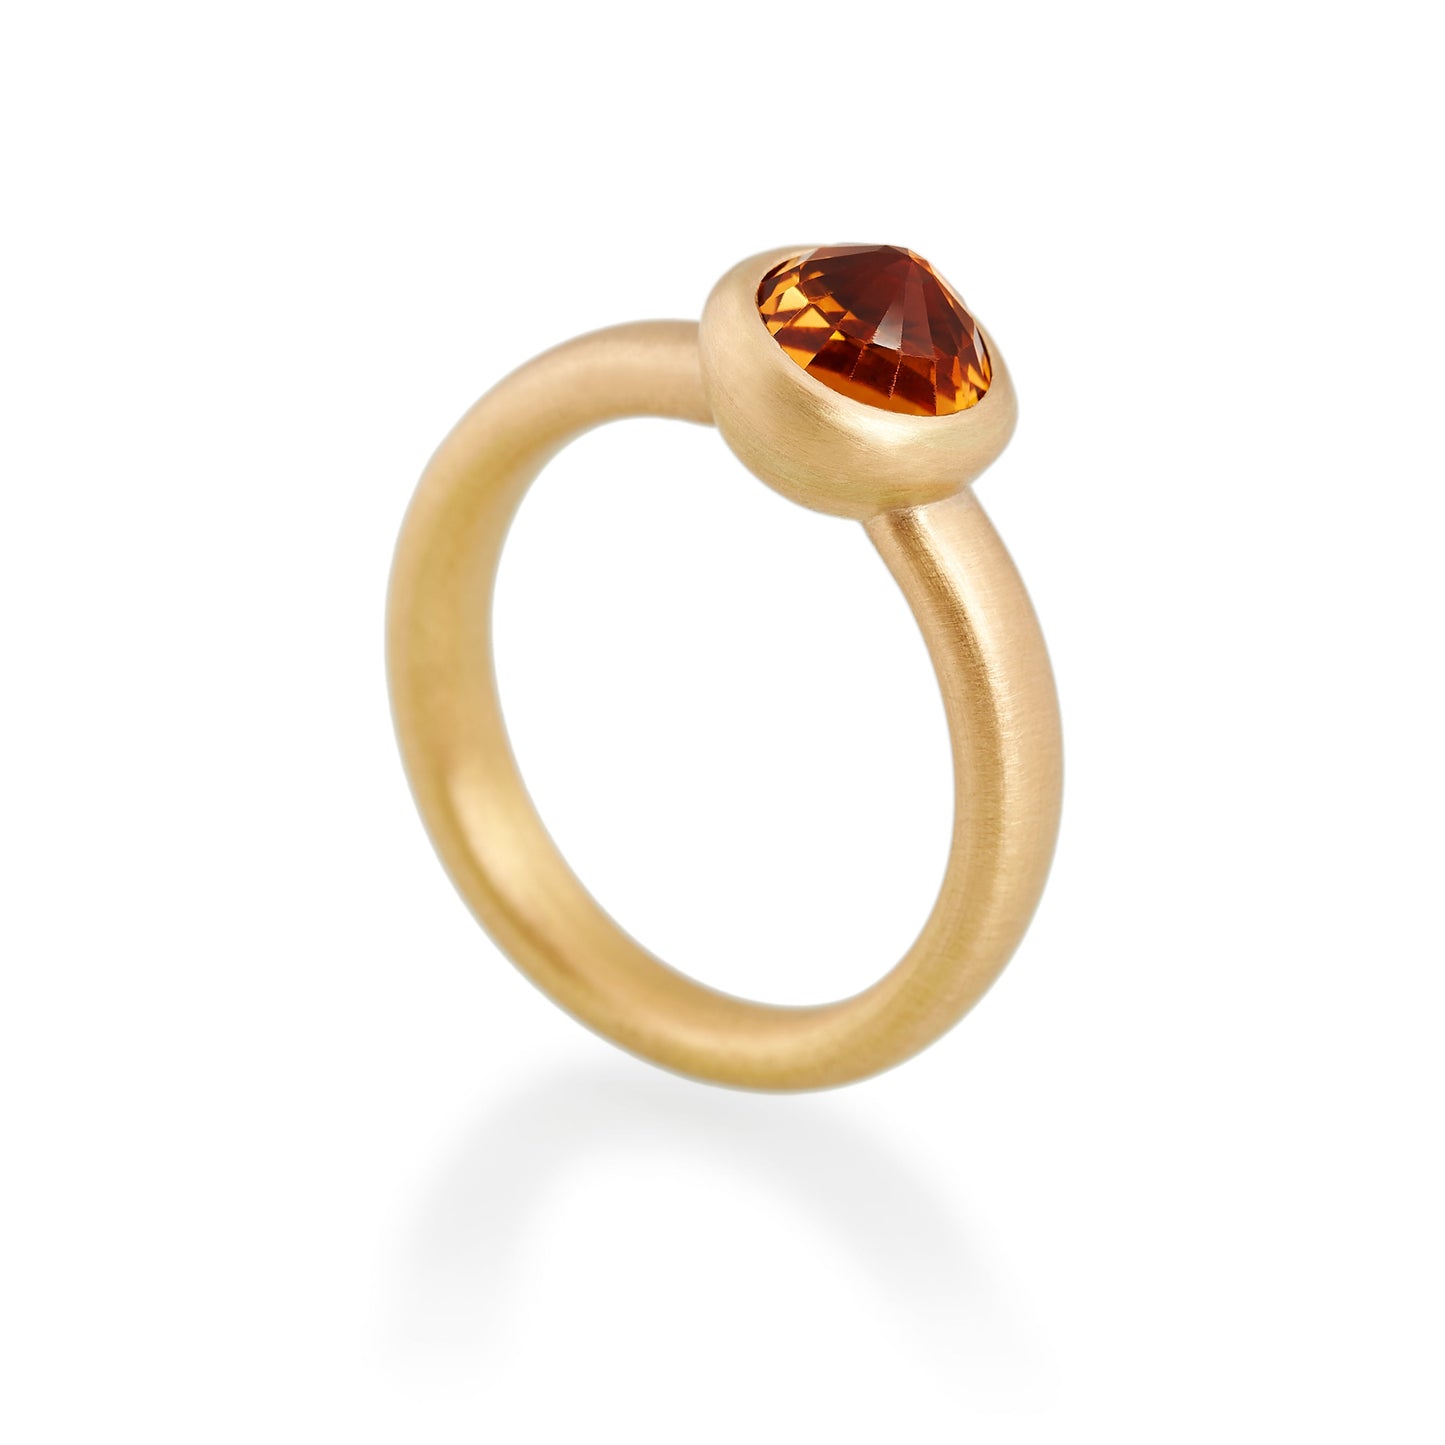 Faceted Citrine Ring, 22ct Gold